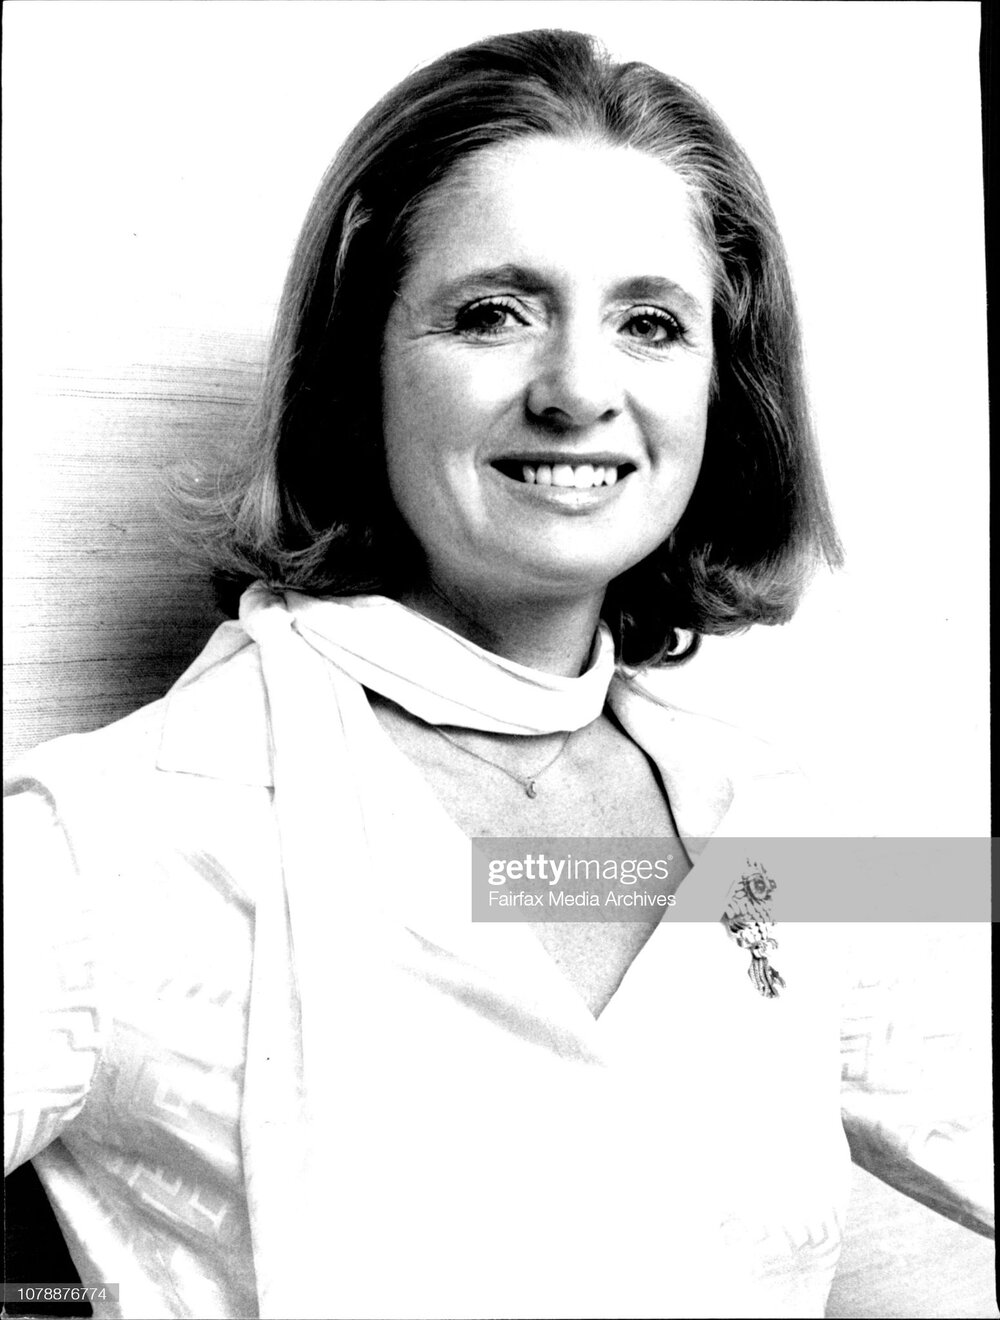 Shirley Lord photographed in Sydney, while on a business trip there as vice-president of Helena Rubenstein. Photo by Antonin Cermak, May 6, 1976.